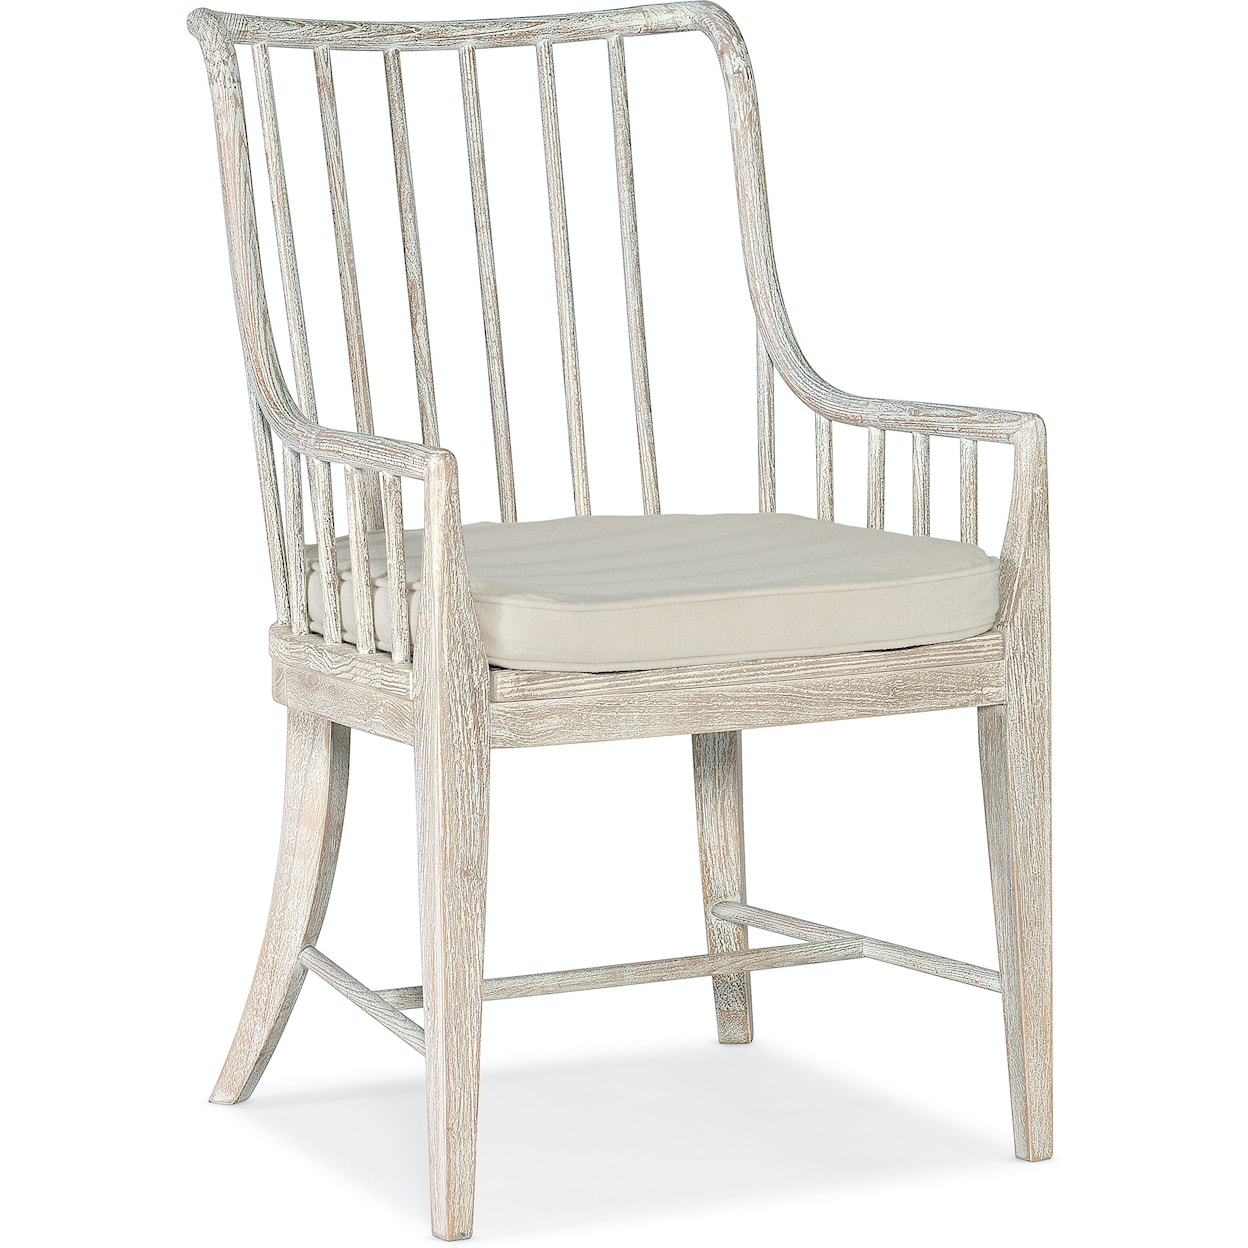 Hooker Furniture Serenity Arm Chair